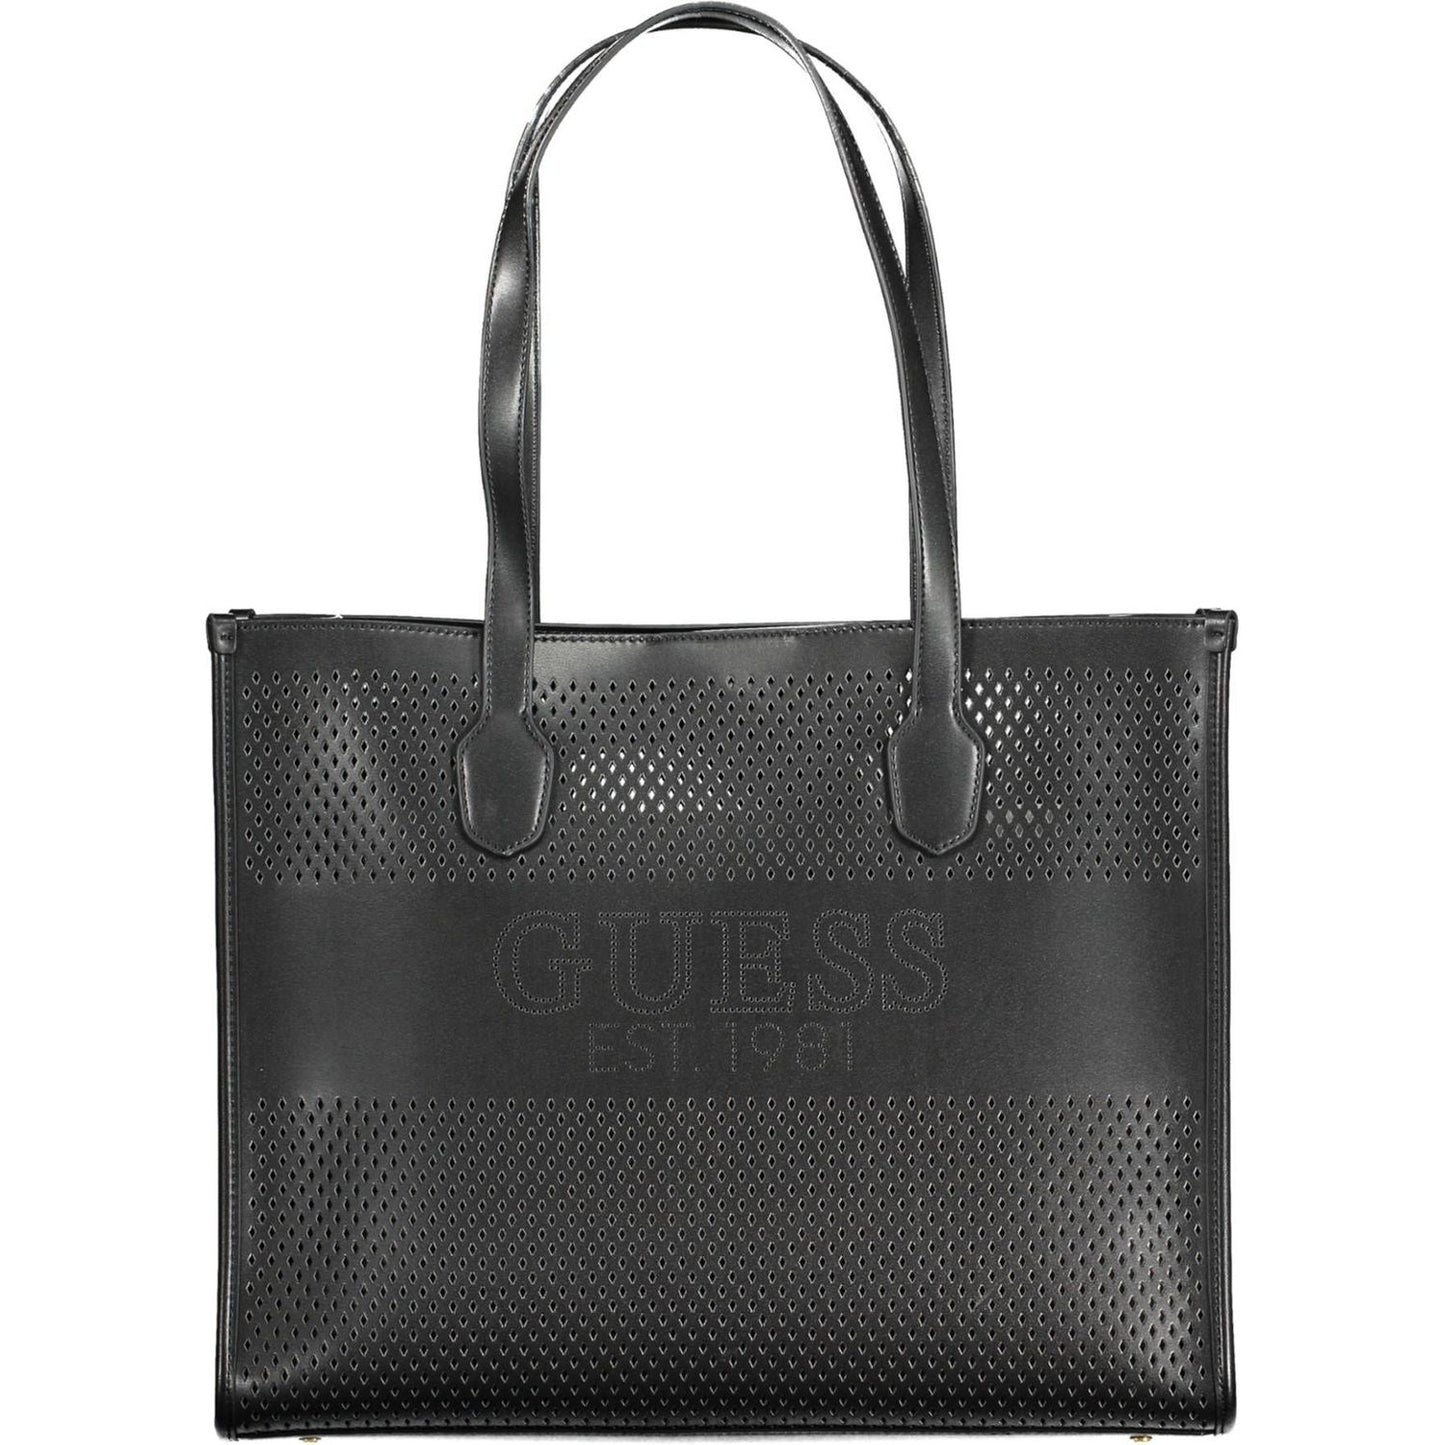 Guess Jeans Chic Black Convertible Shoulder Bag with Pochette chic-black-convertible-shoulder-bag-with-pochette